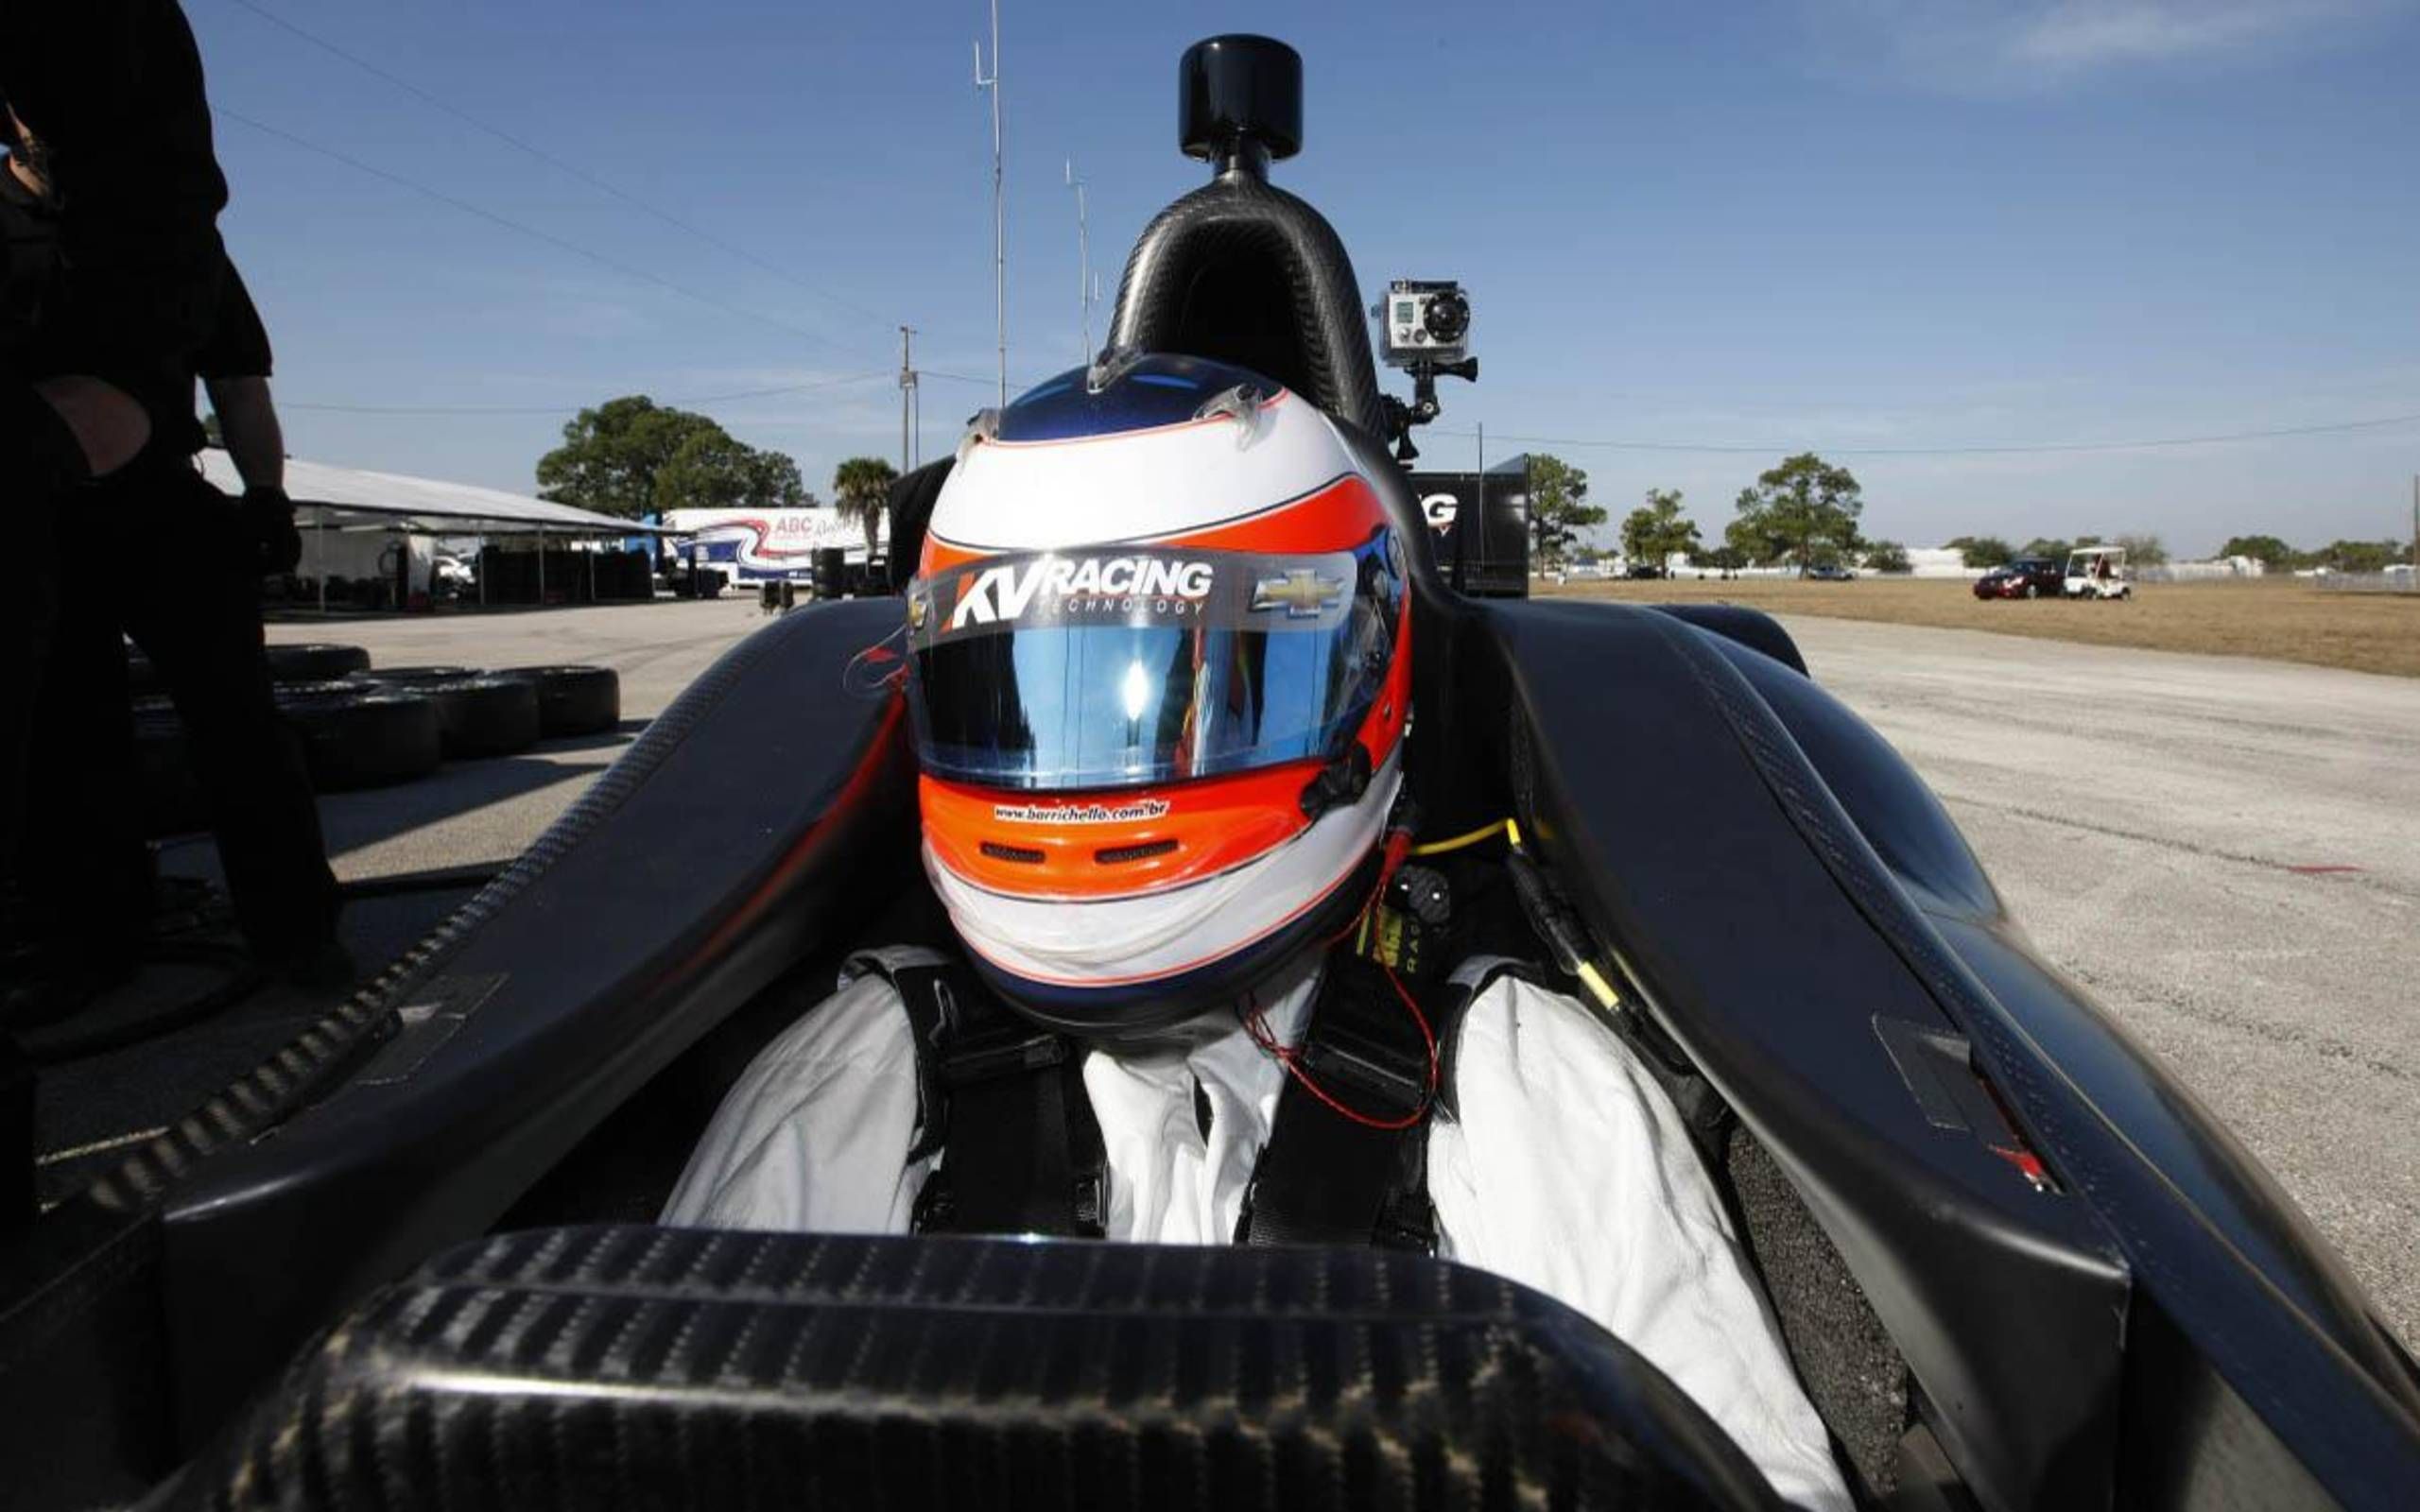 IndyCar: Rubens Barrichello still mulling decision on joining series